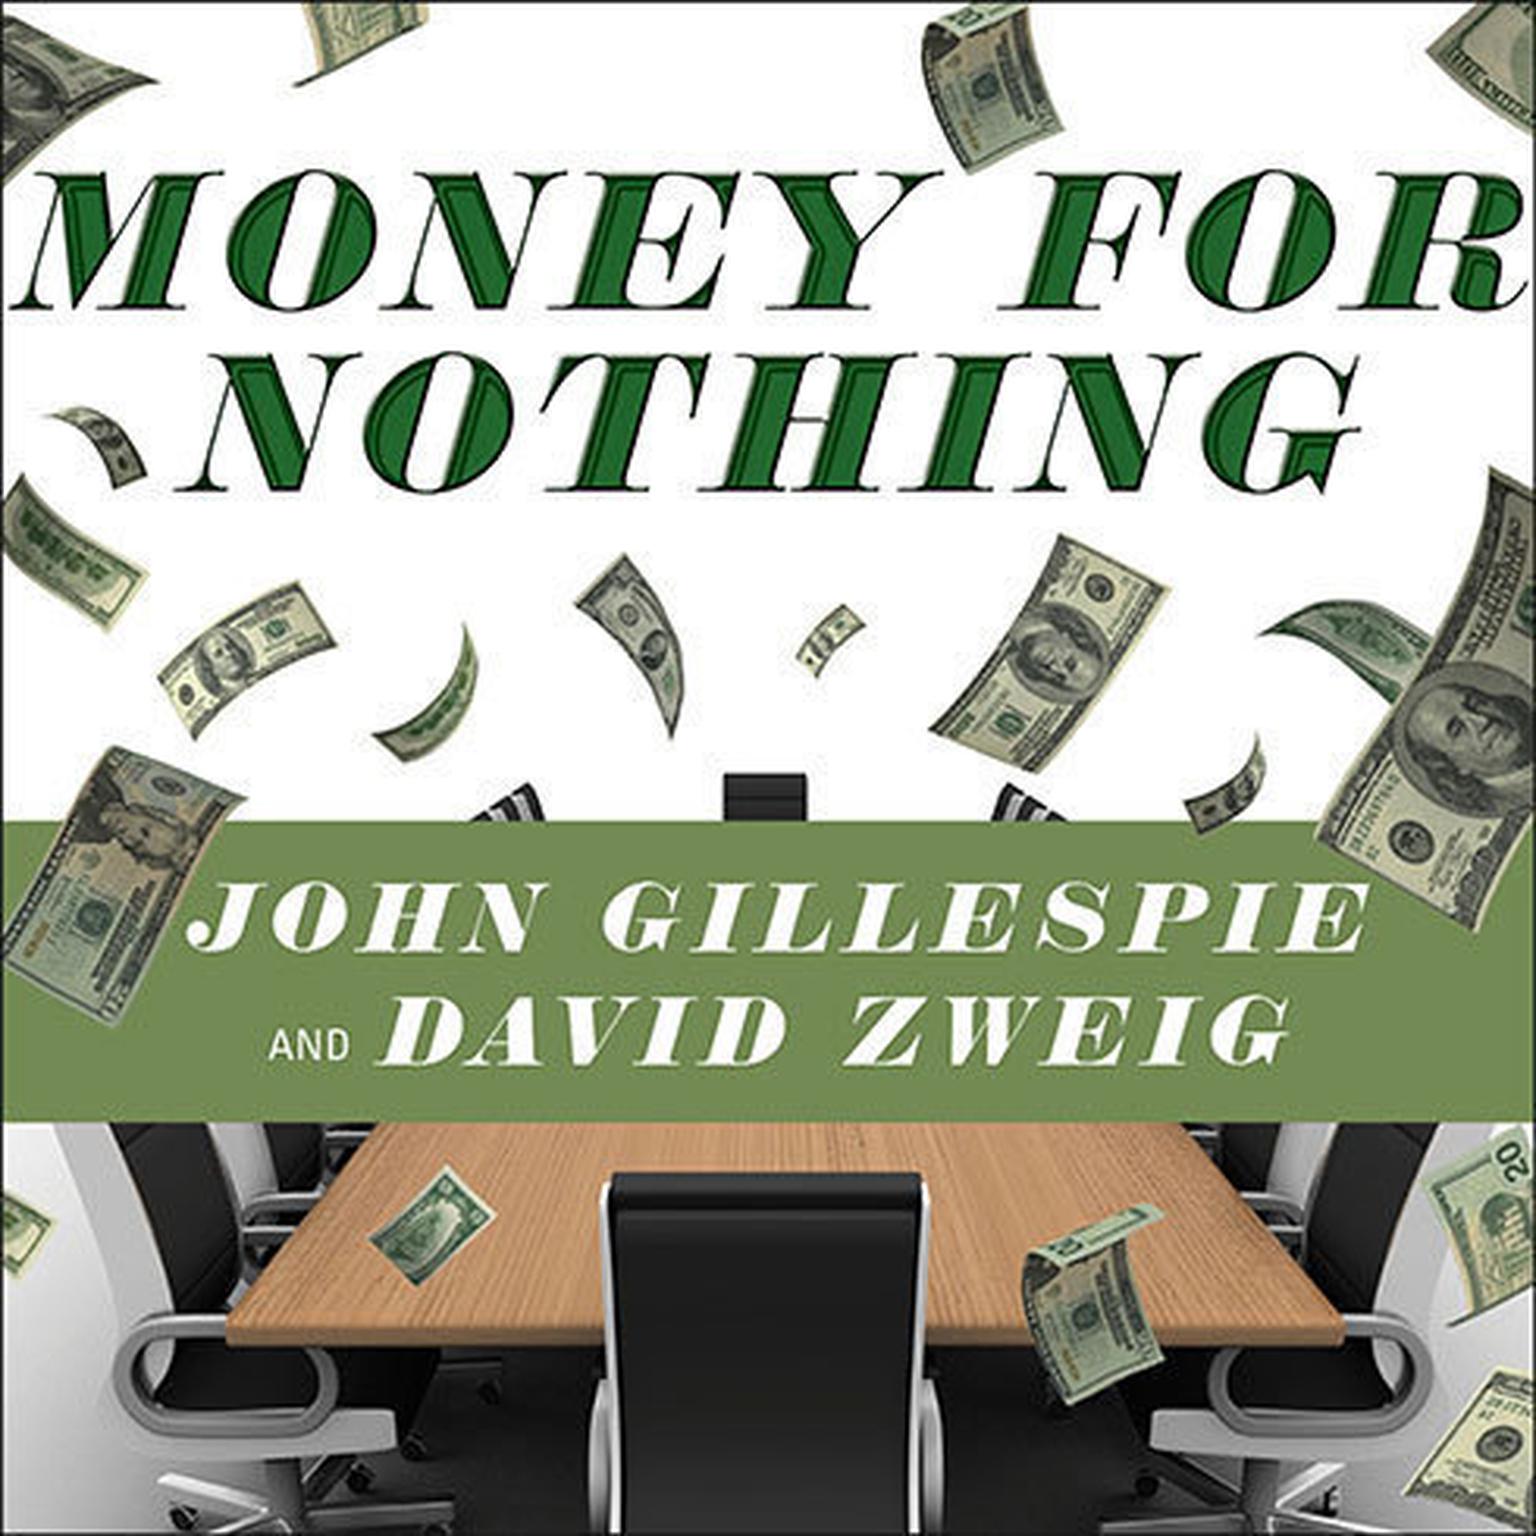 Money for Nothing: How the Failure of Corporate Boards Is Ruining American Business and Costing Us Trillions Audiobook, by John Gillespie